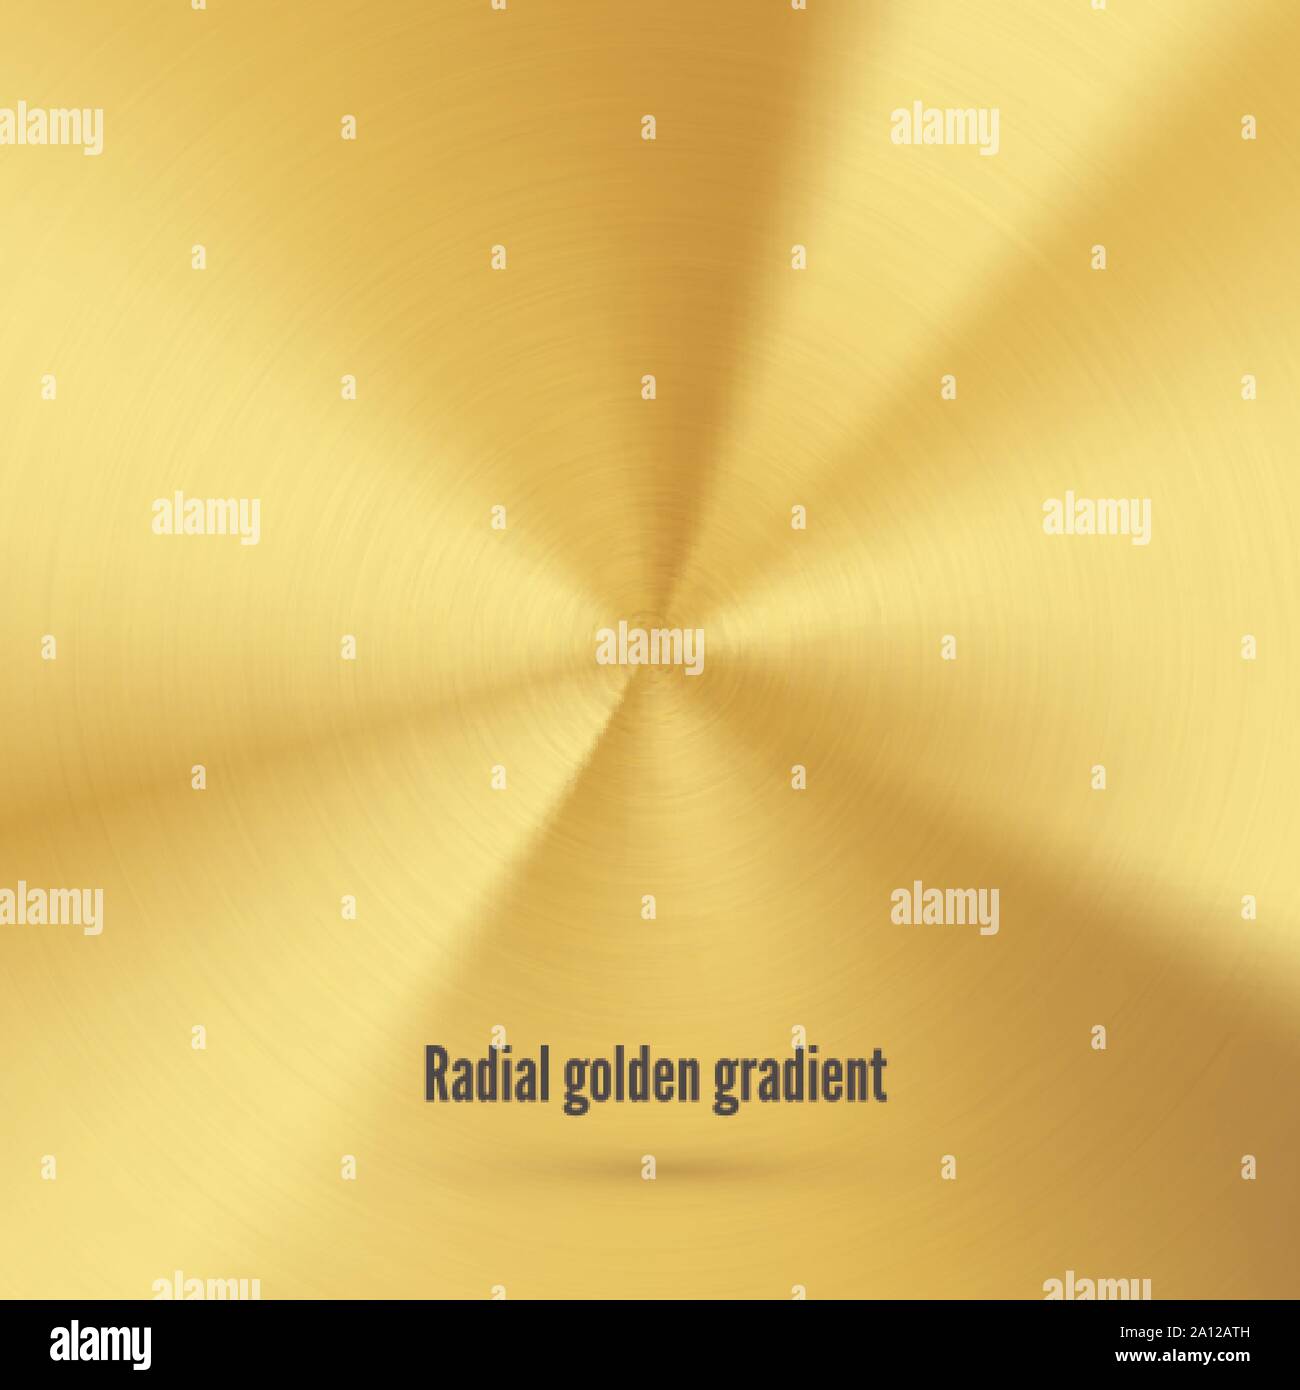 Golden Radial Gradient with scratches. Metallic Gold Foil Surface. Golden Realistic Texture. Vector Illustration Stock Vector